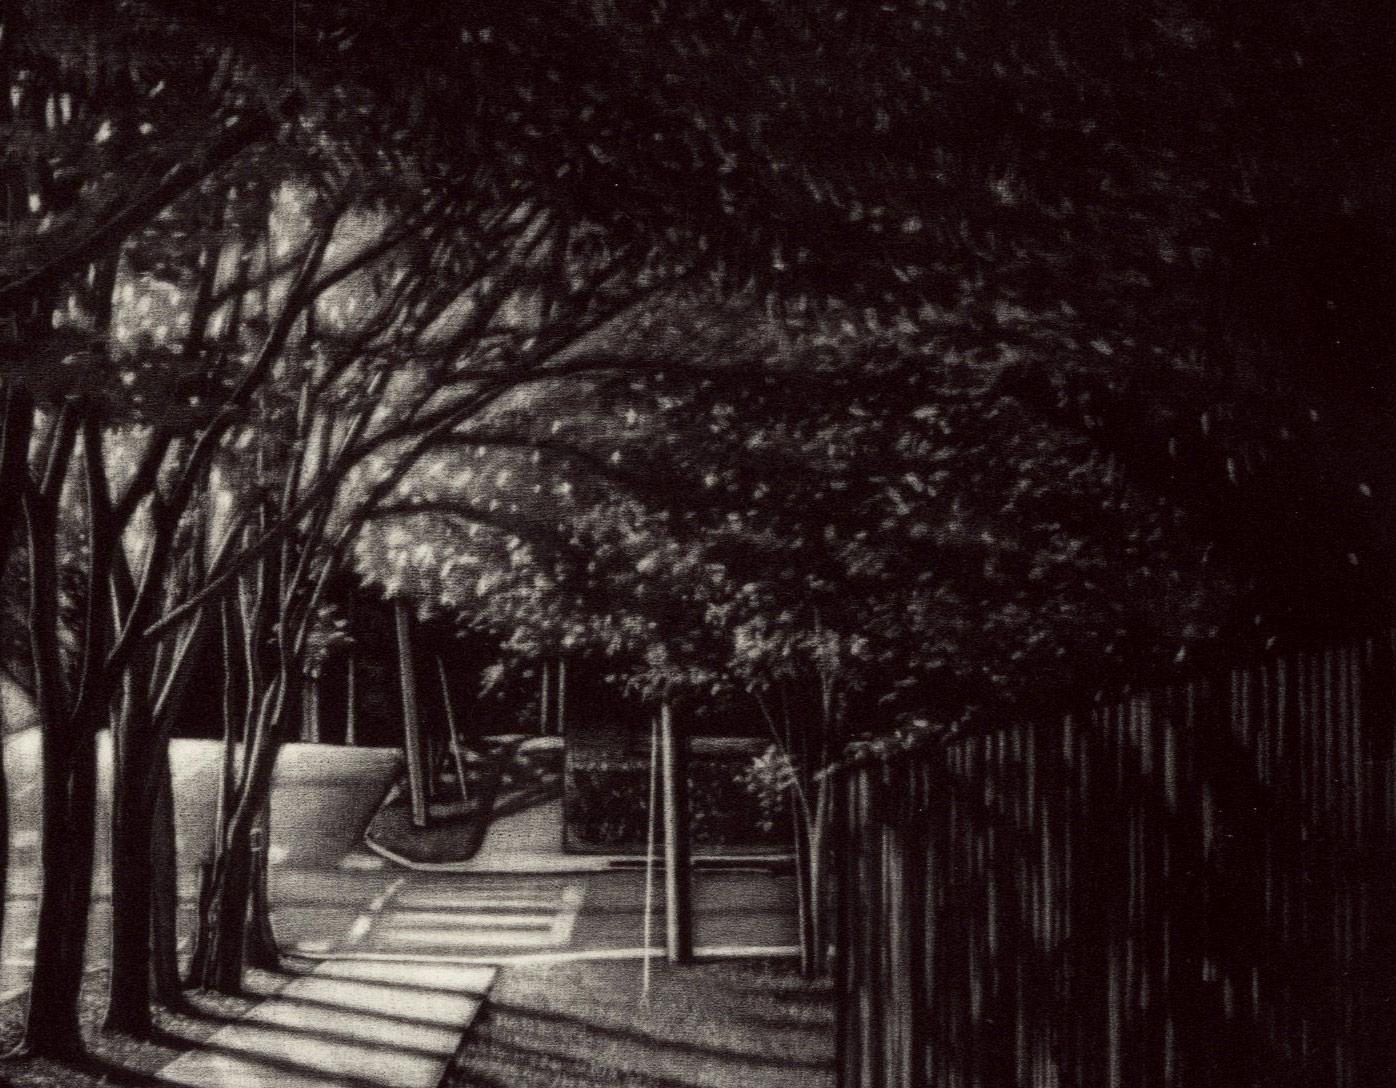 Spill (A canopy of crepe myrtle trees dominate this deep southern street night) - American Modern Print by Jacob Crook